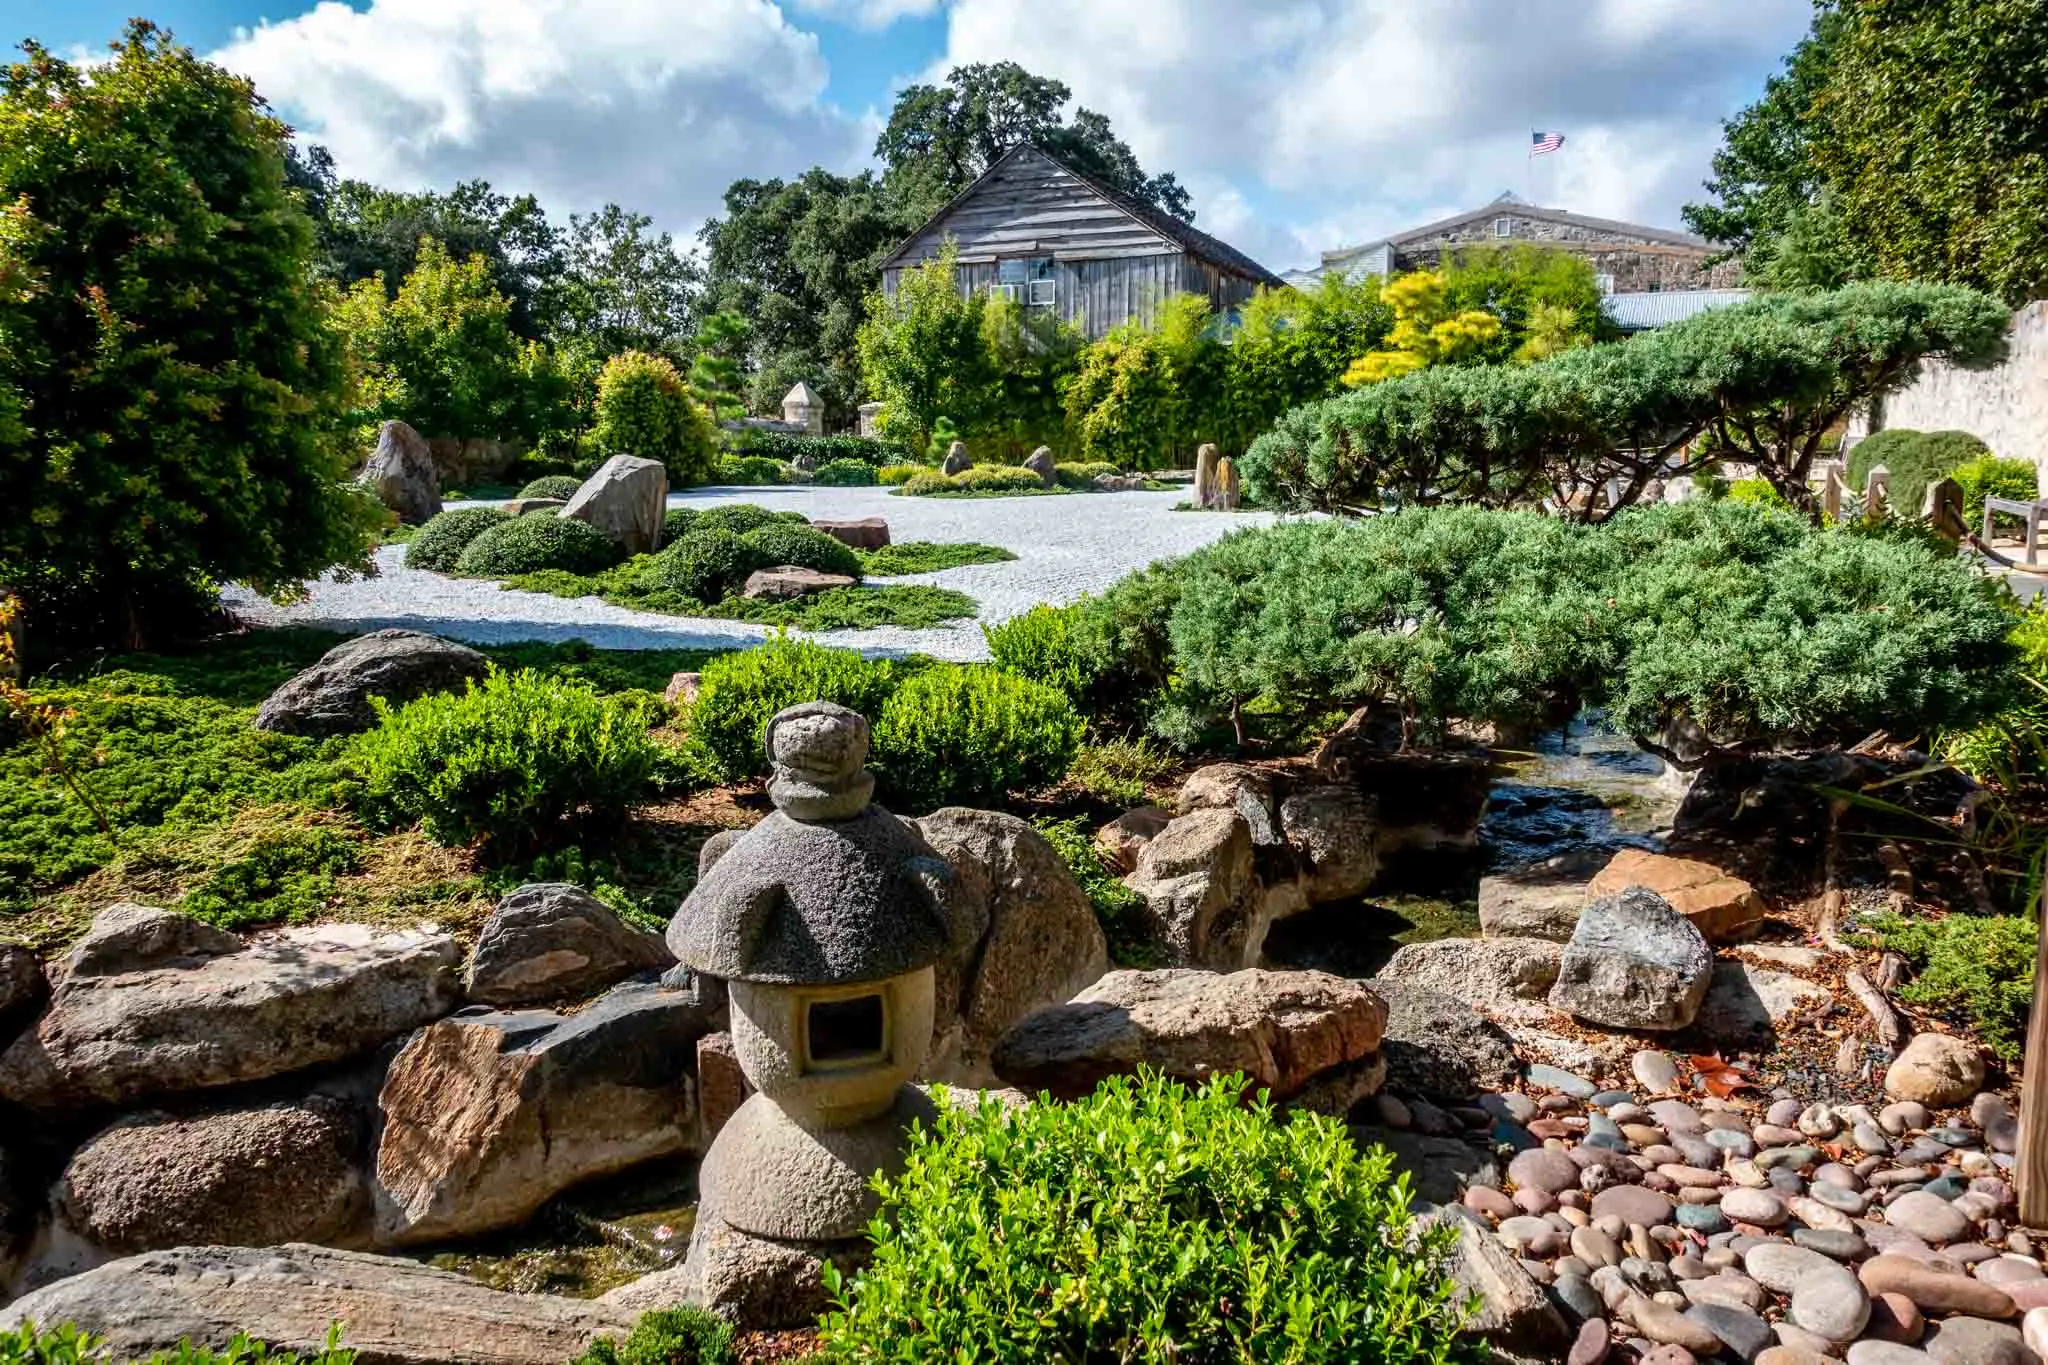 Plants, rocks, and decorations in a Japanese-style garden 